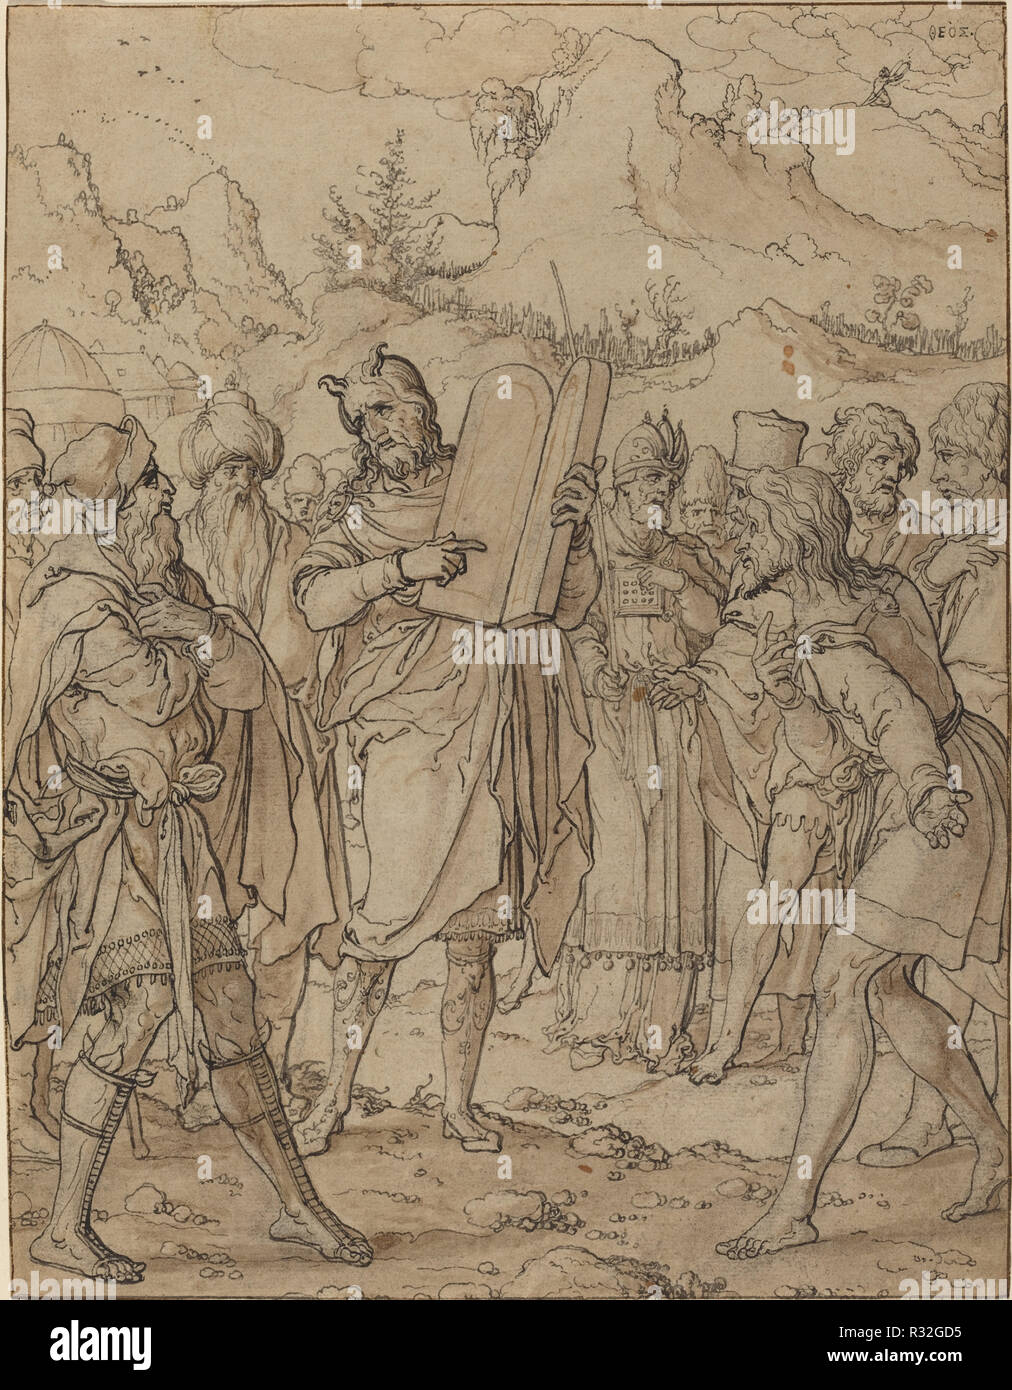 Moses Delivering God's Commandments to the Israelites. Dimensions: overall: 25.9 x 20 cm (10 3/16 x 7 7/8 in.). Medium: pen and black ink and brown wash on laid paper. Museum: National Gallery of Art, Washington DC. Author: JAN SWART VAN GRONINGEN. Stock Photo